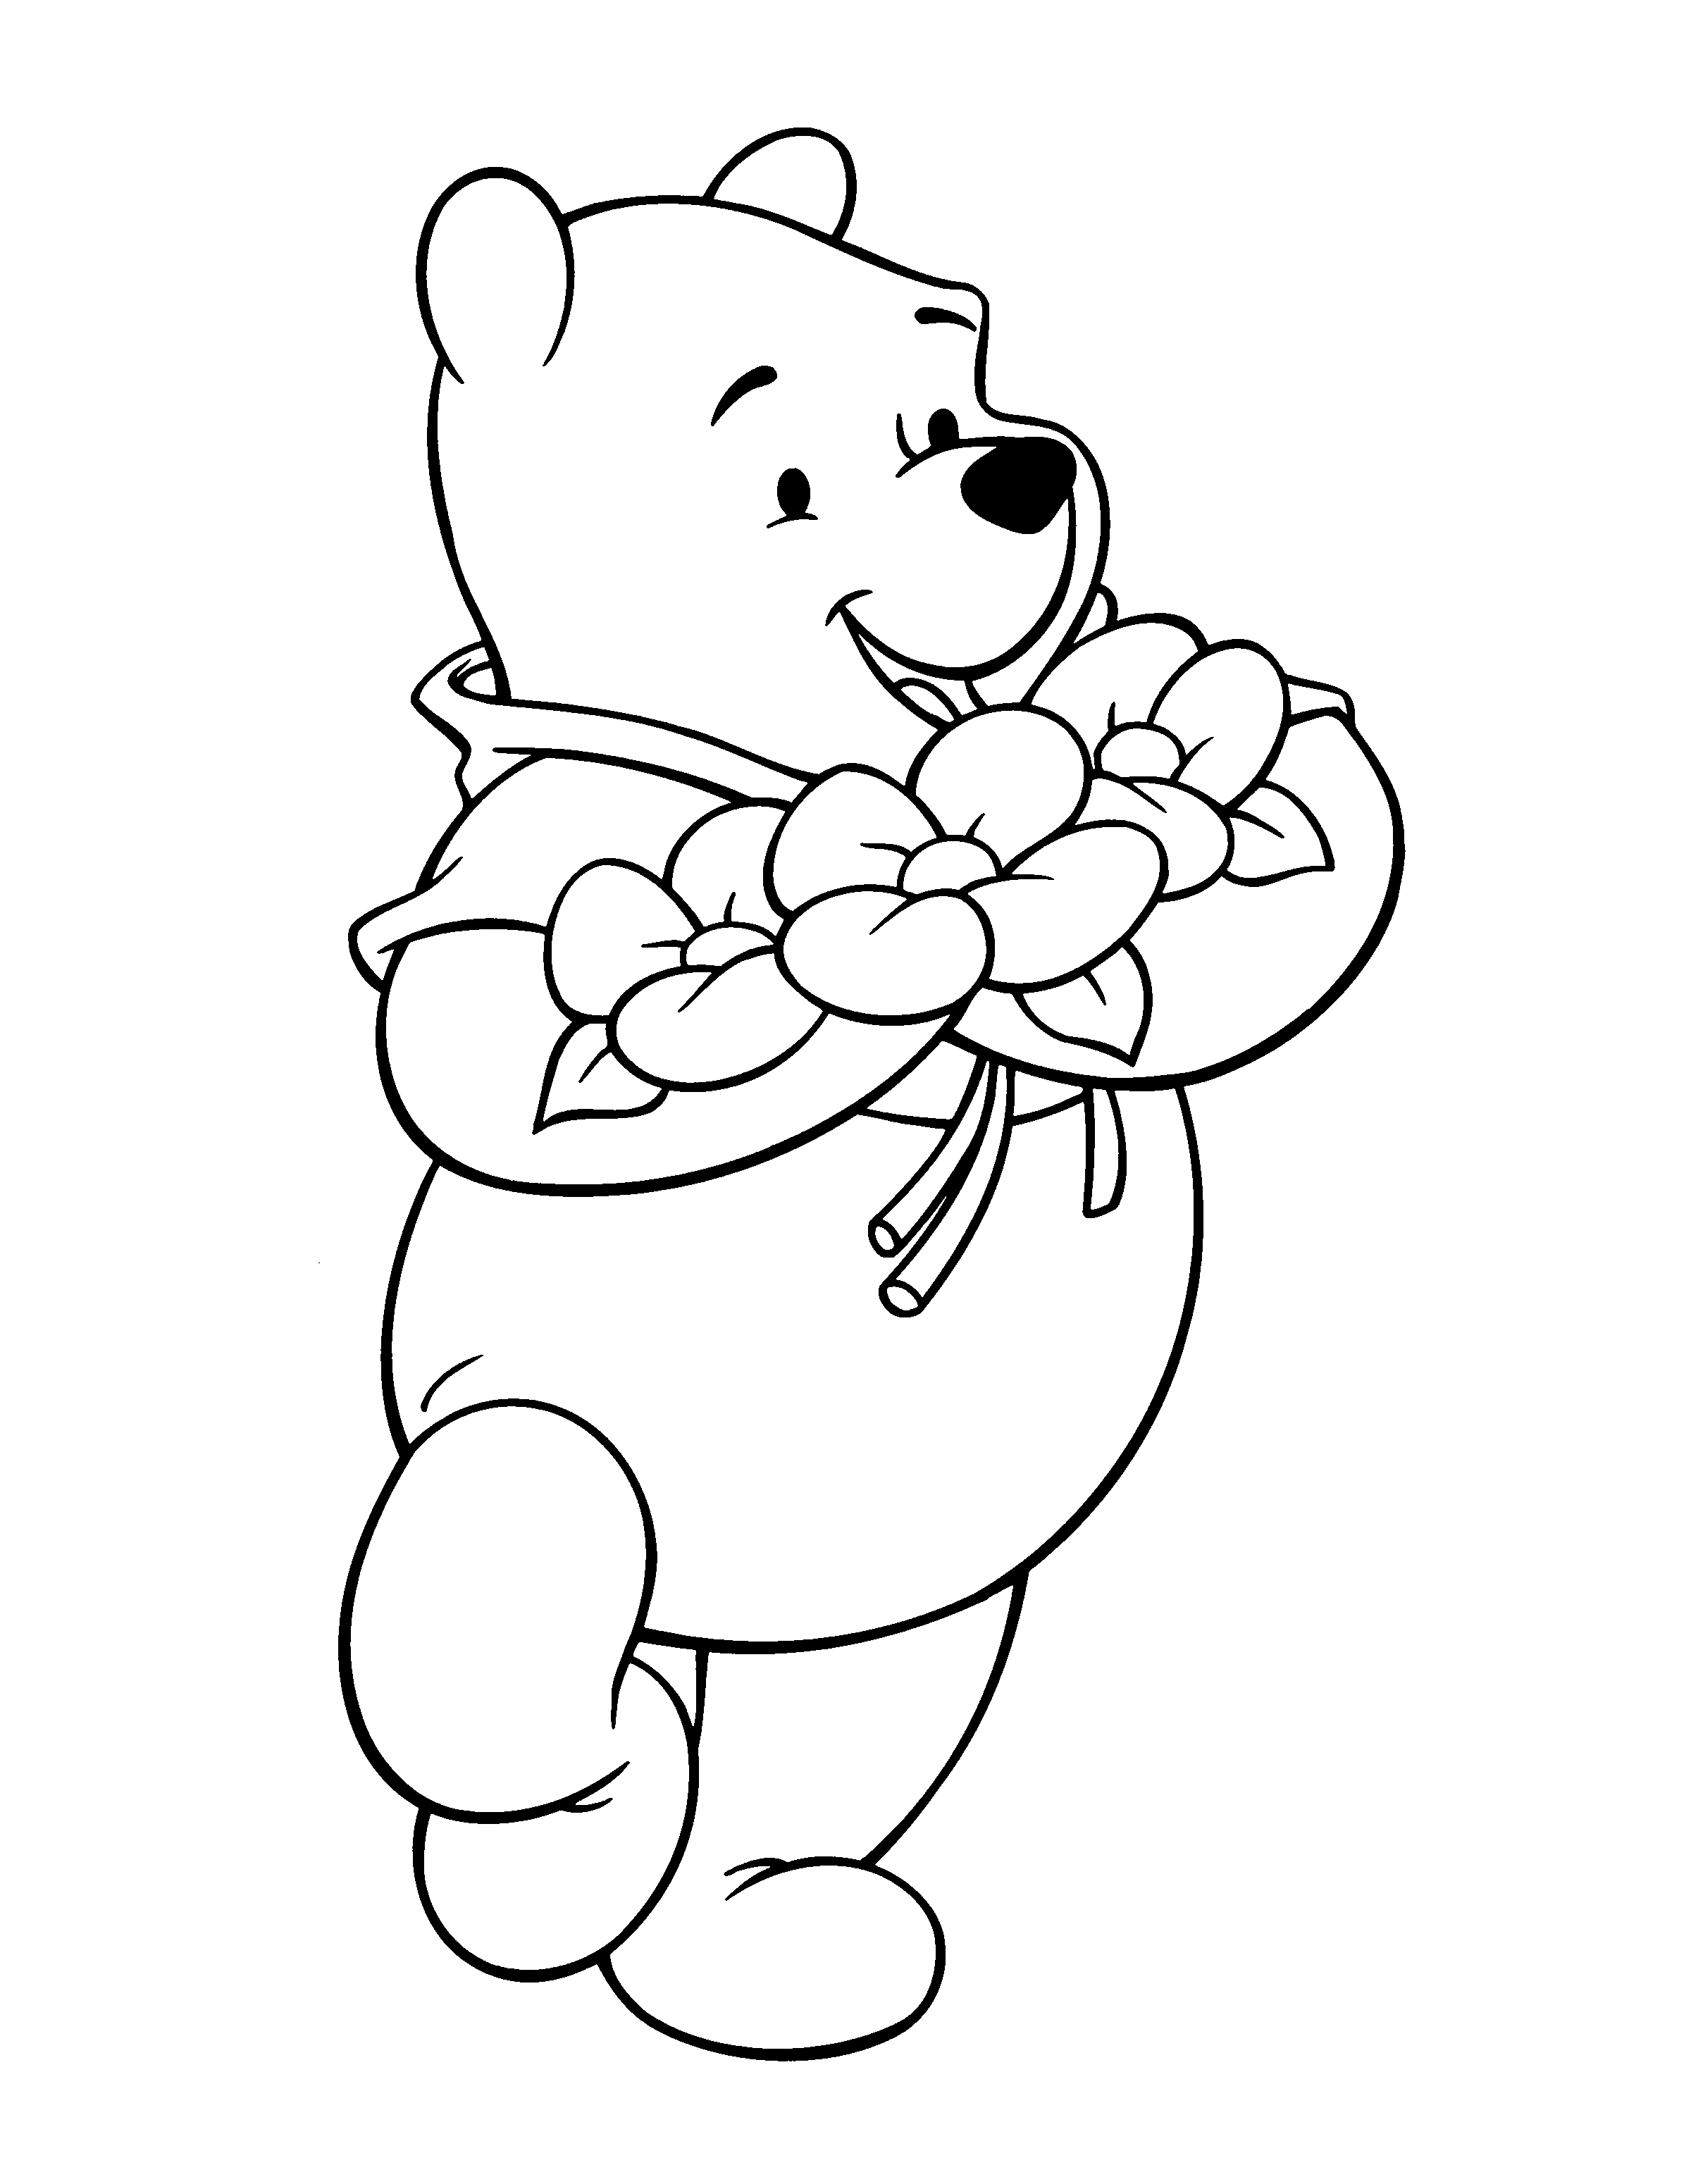 Printable Winnie The Pooh Coloring Pages Free Printable Winnie The Pooh Coloring Pages For